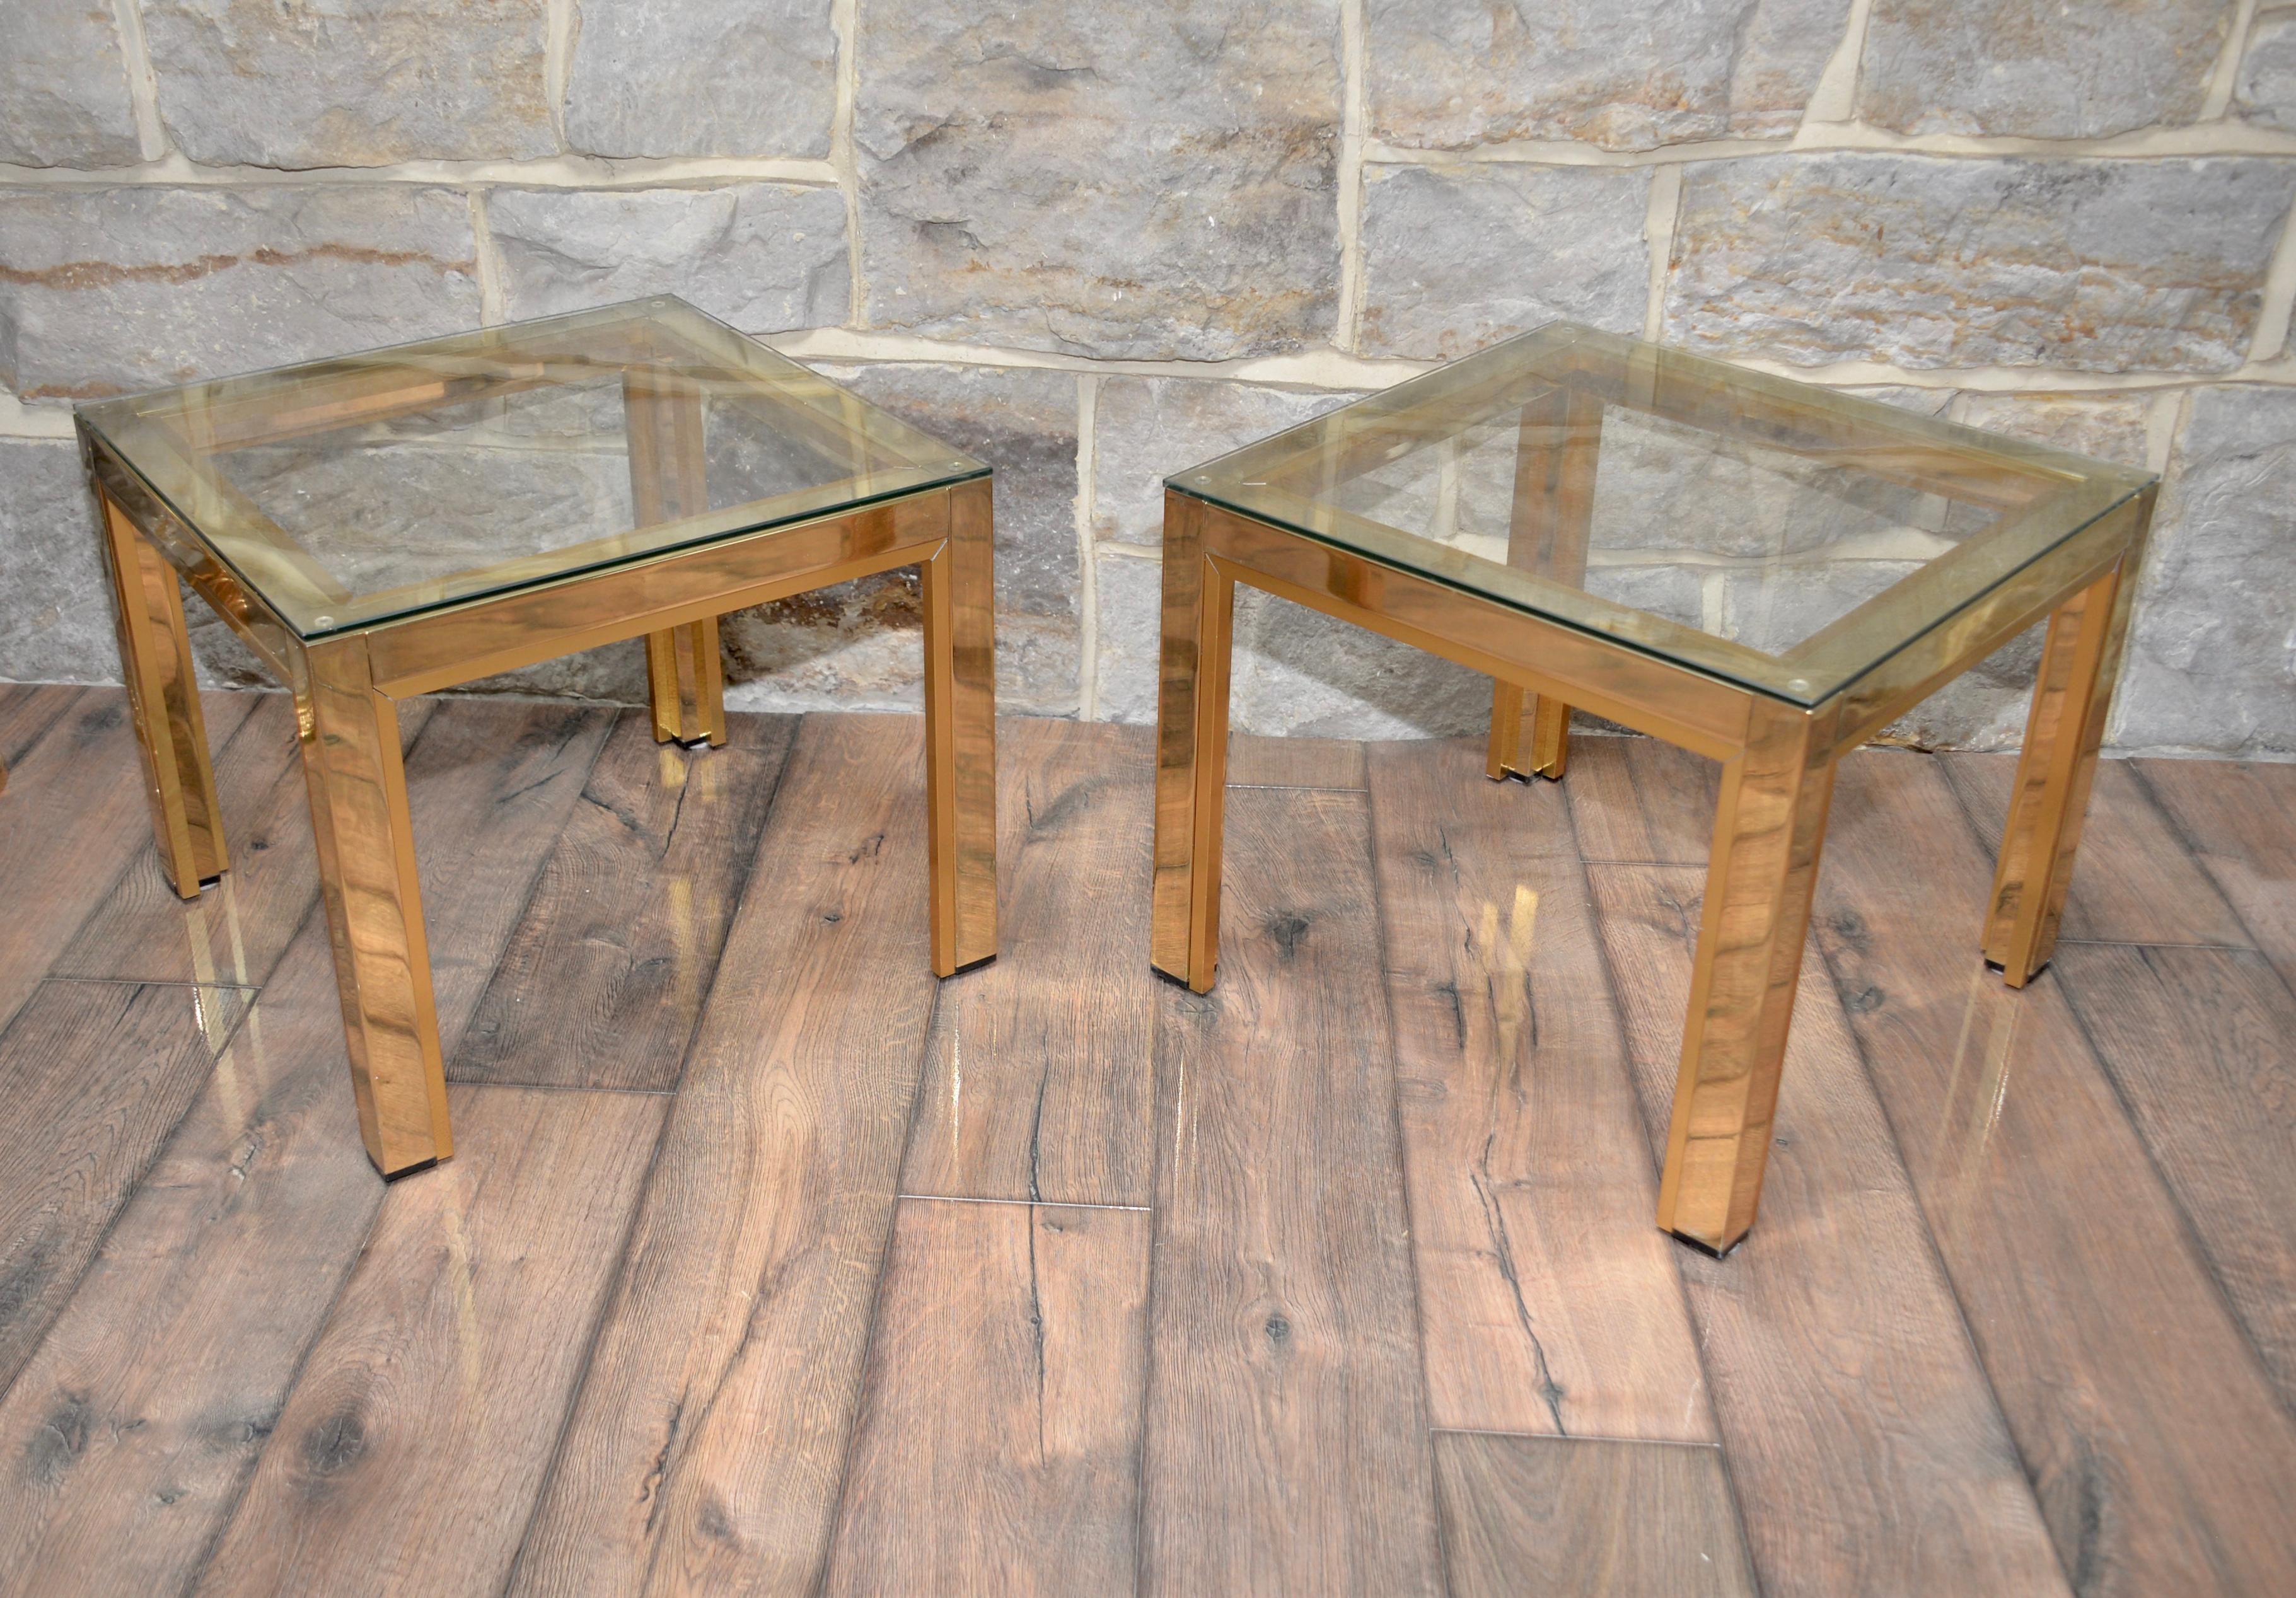 A stunning pair of vintage Italian side tables by Renato Zevi for Romeo Rega. These are a classic vintage design that is well known and well documented in design literature. These tables are gold plated with smoked glass shelves. This listing is for